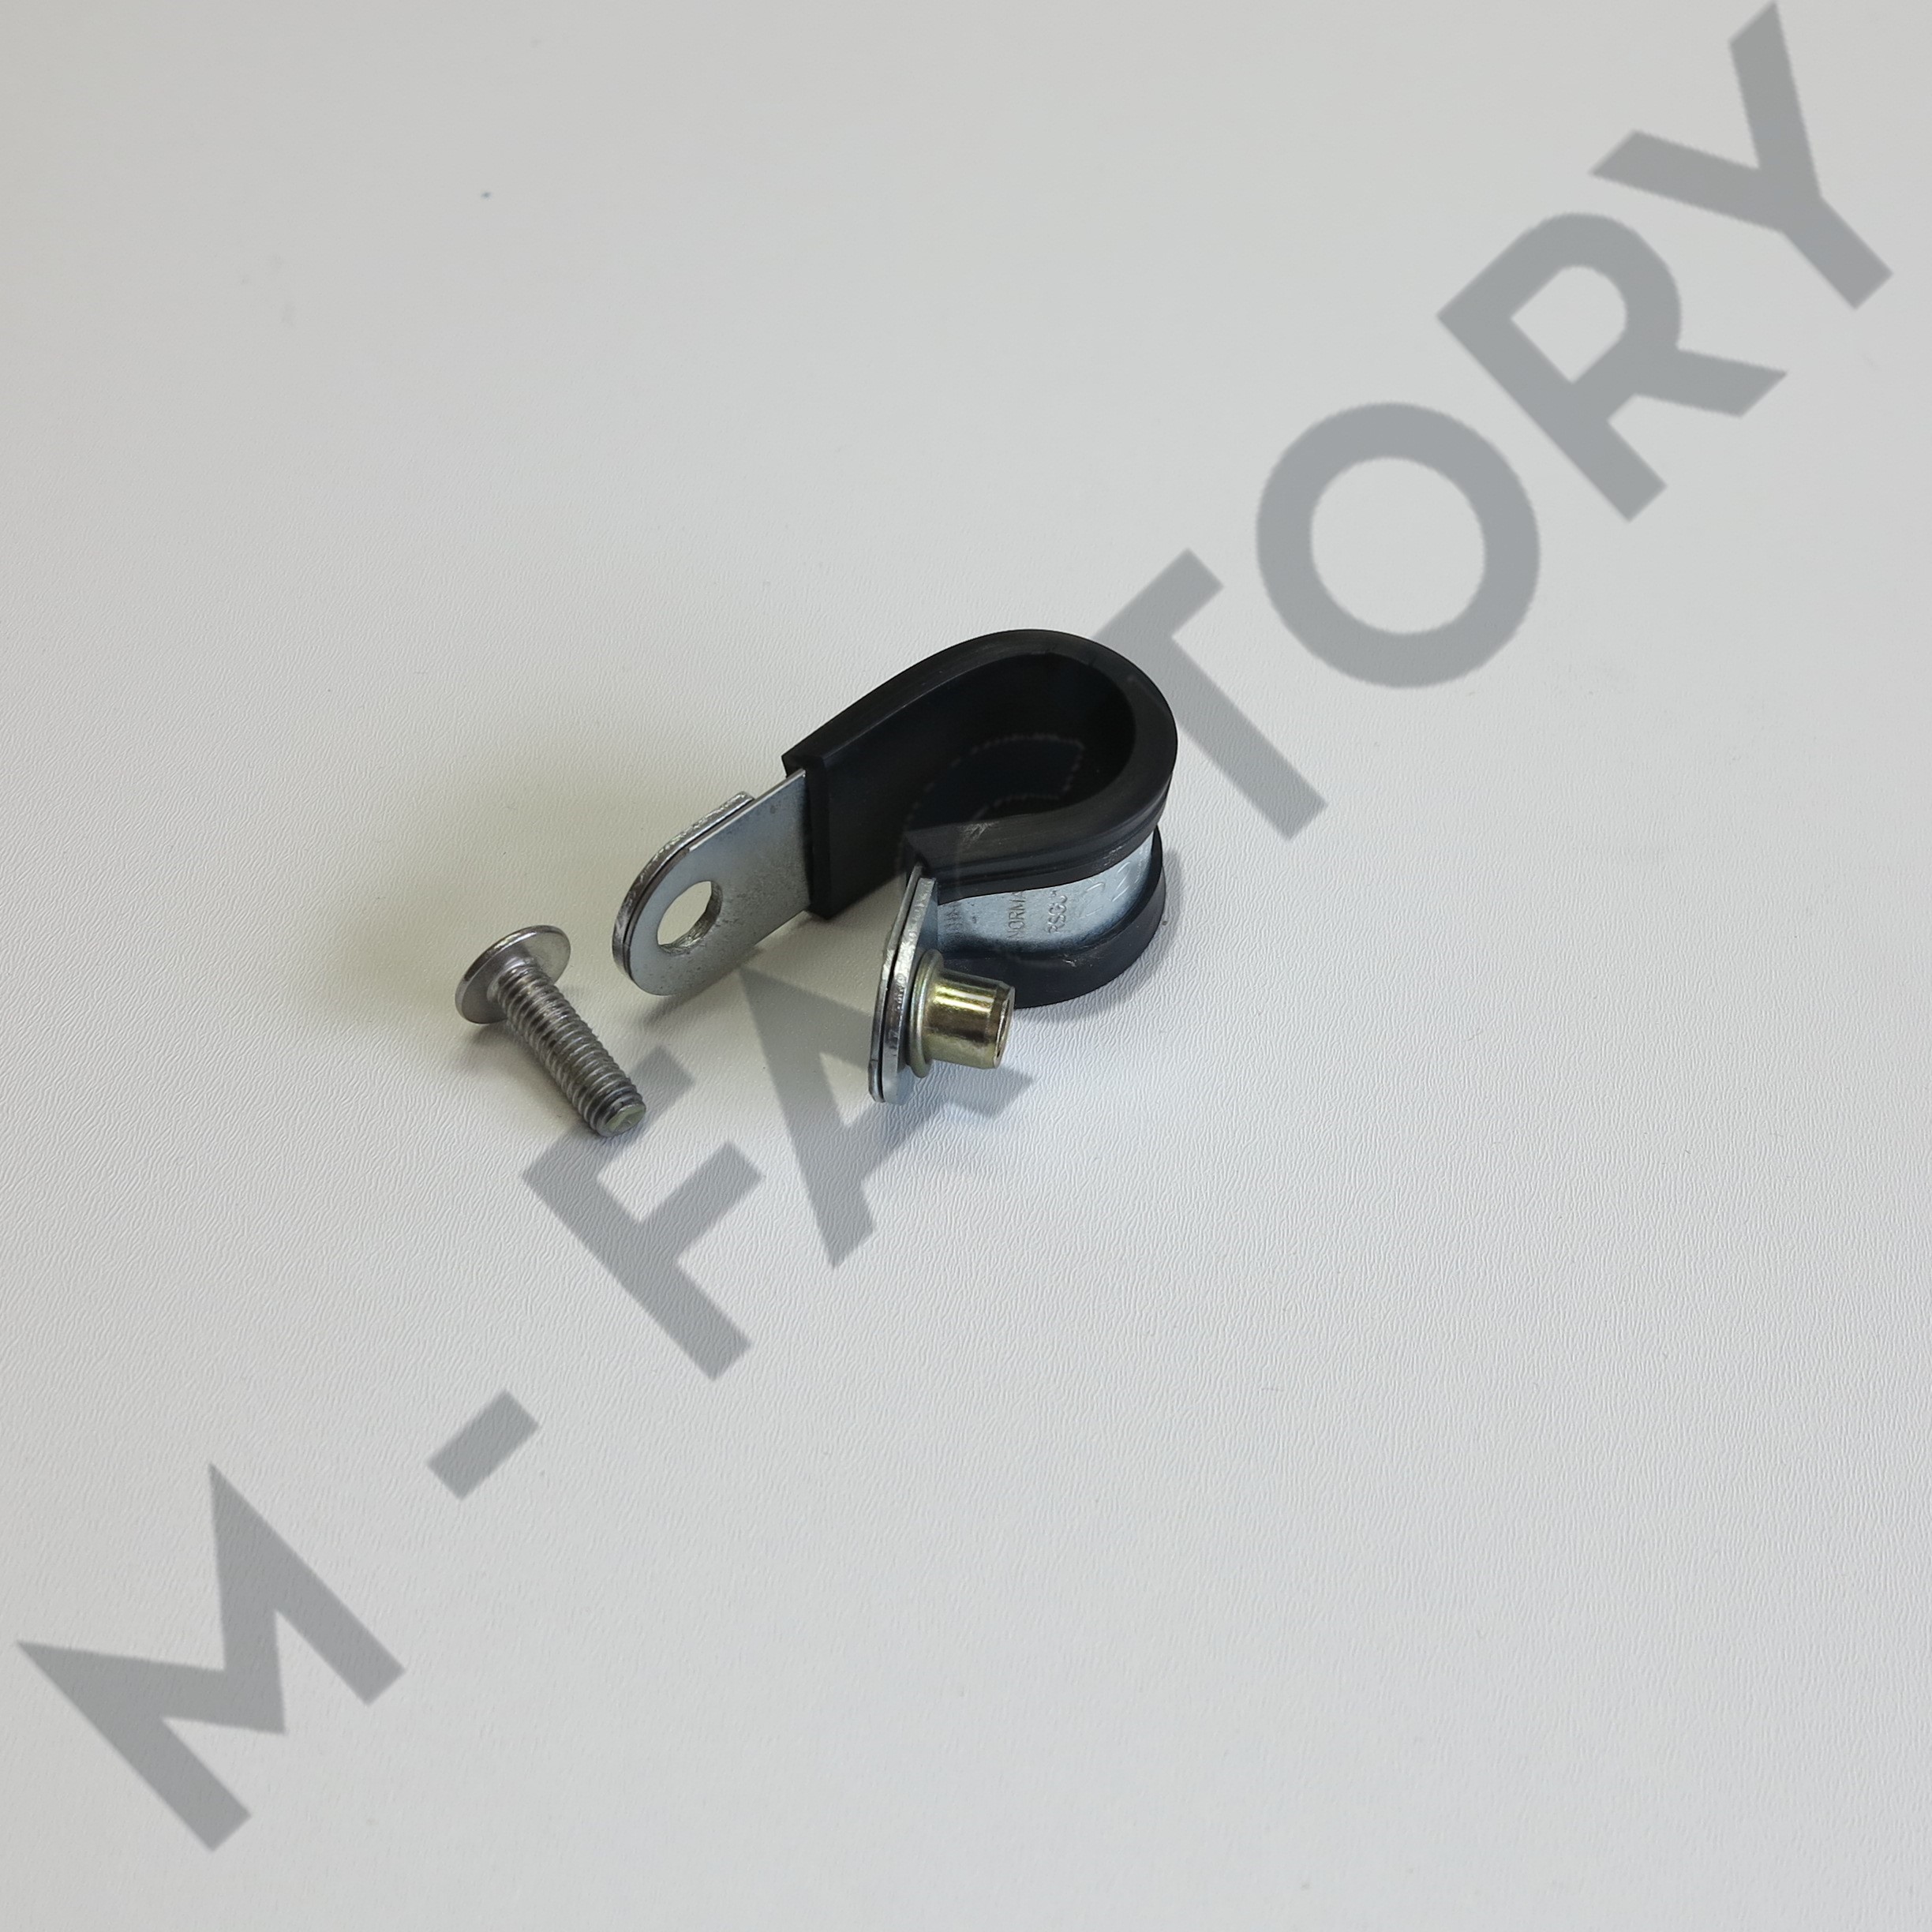 MF0025 - Engine Guard fixing clamp